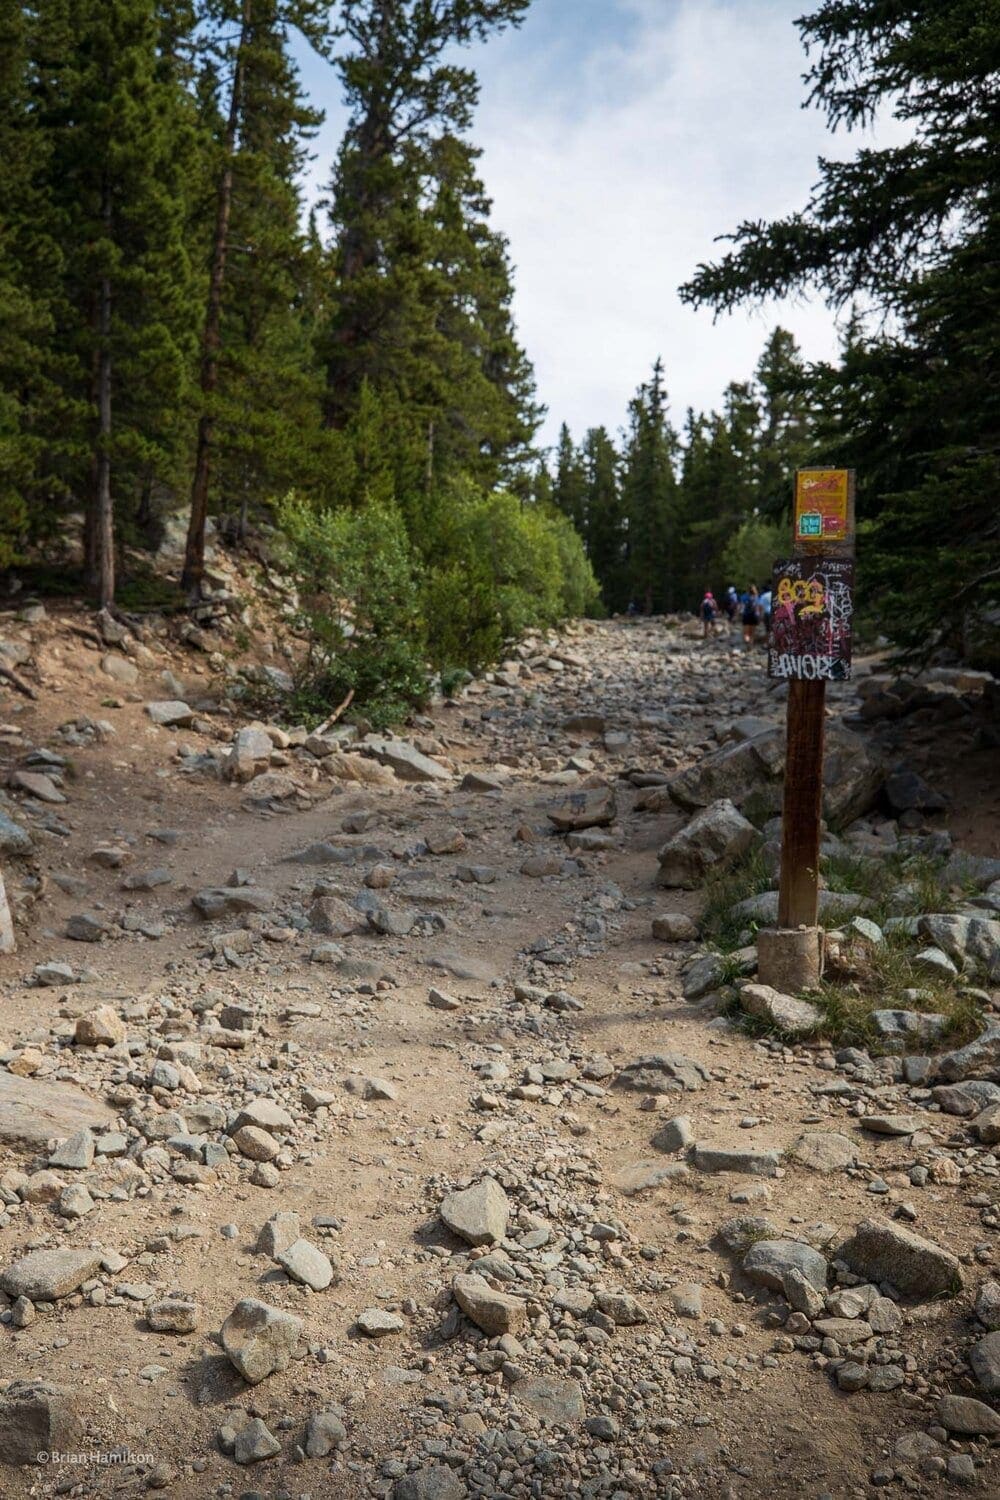 Photo 2: The St. Mary’s Glacier trail is easy to navigate.